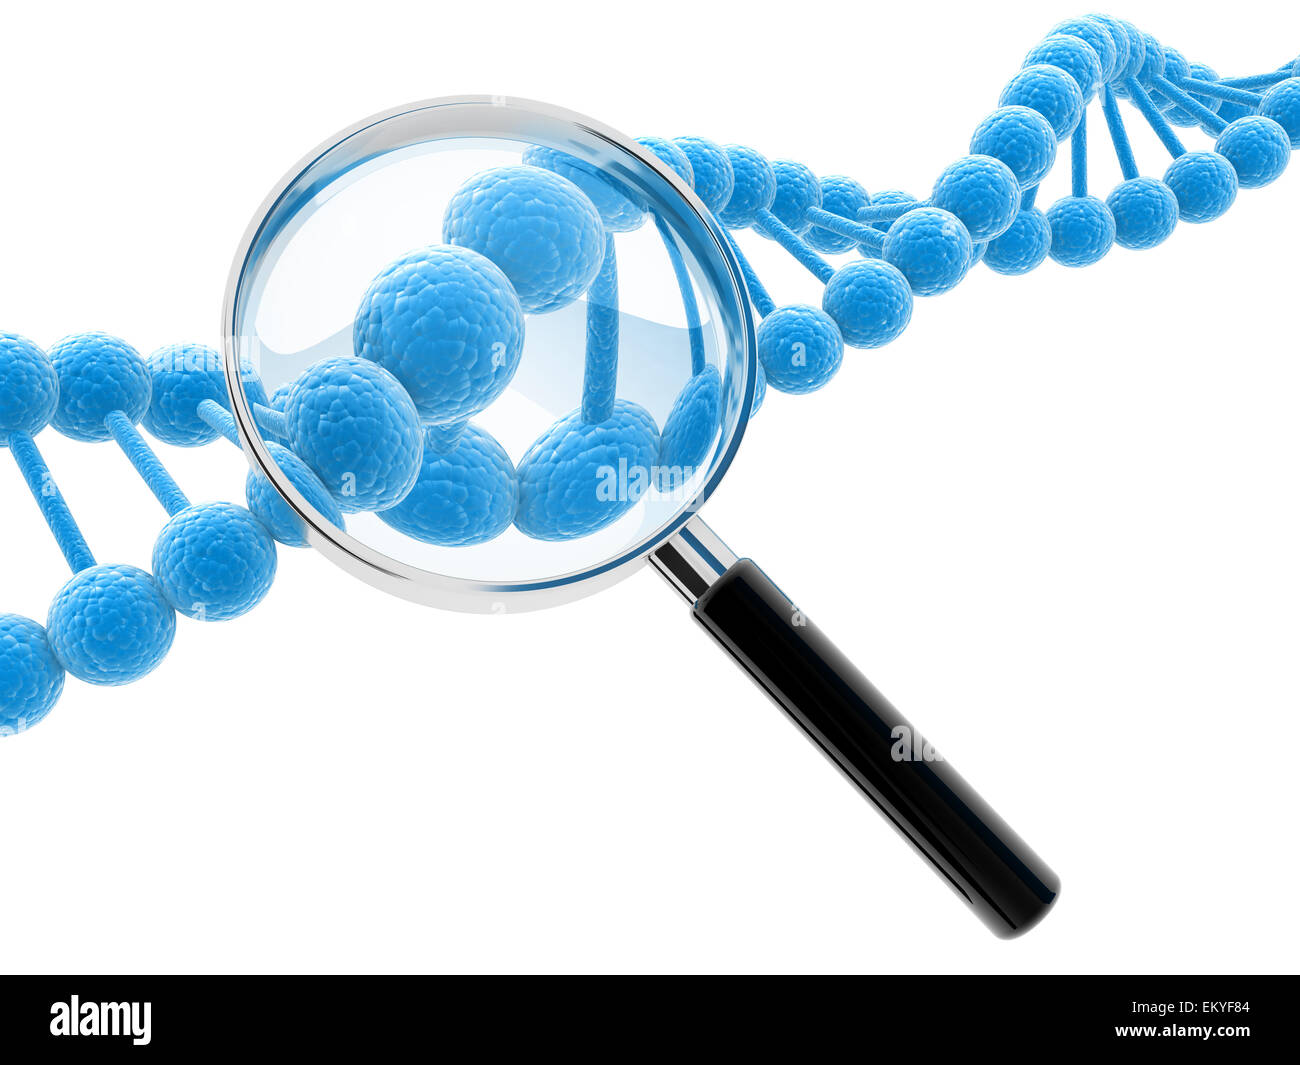 blue DNA model and hand glass on white background. Stock Photo